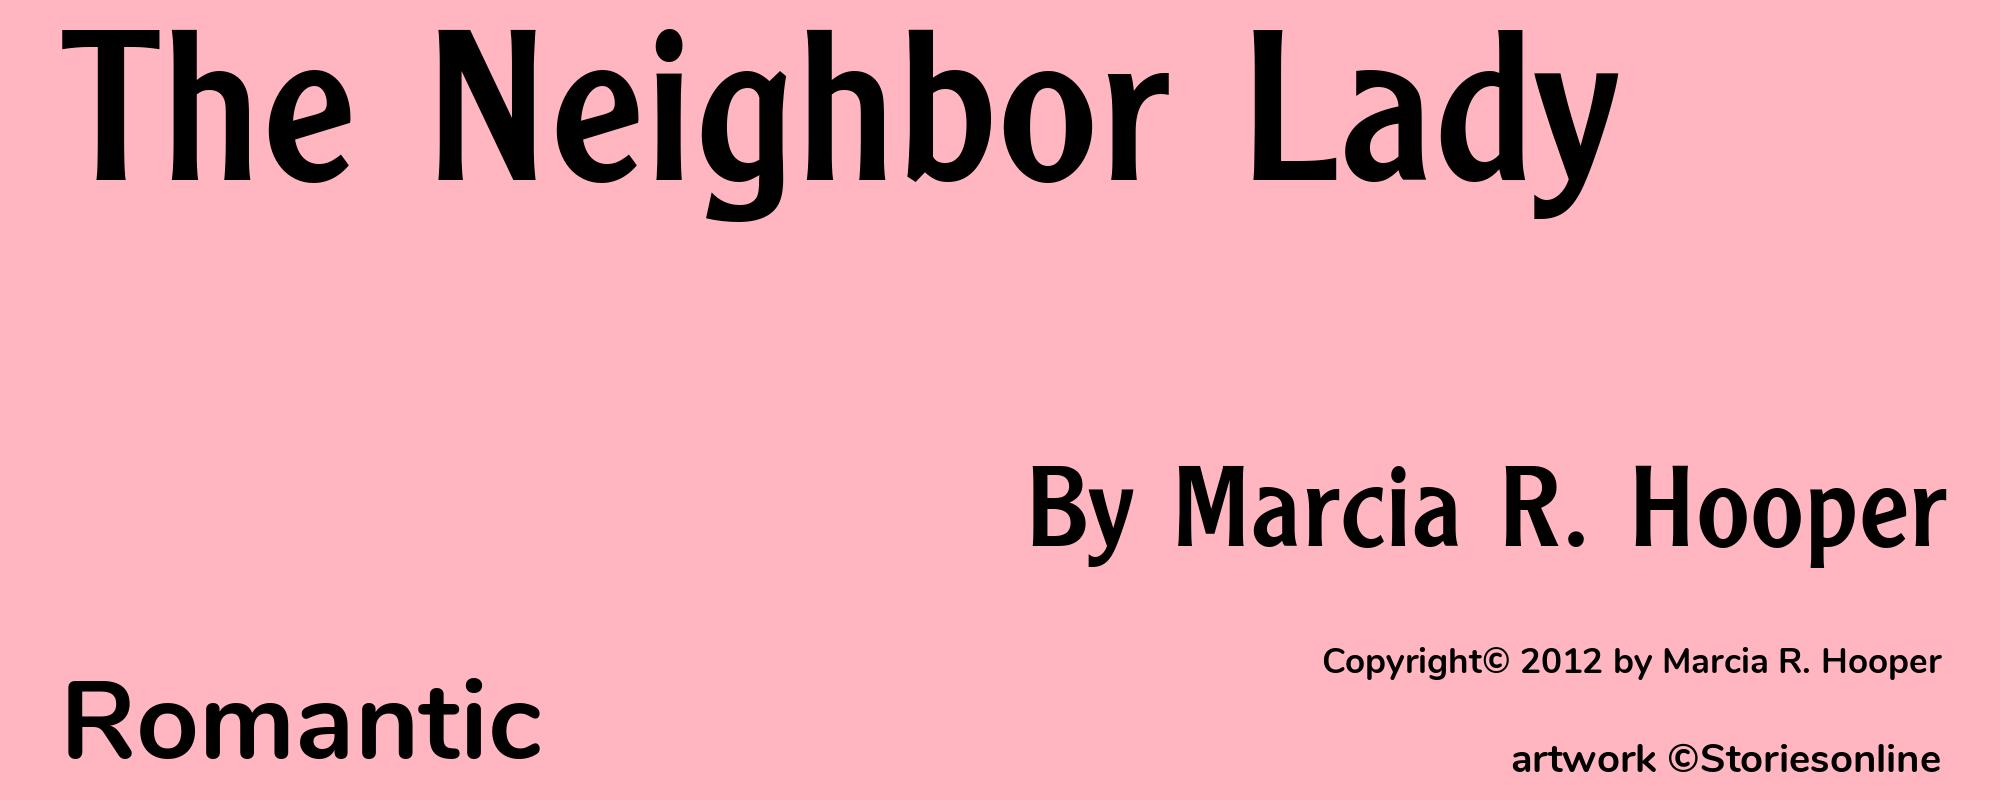 The Neighbor Lady - Cover